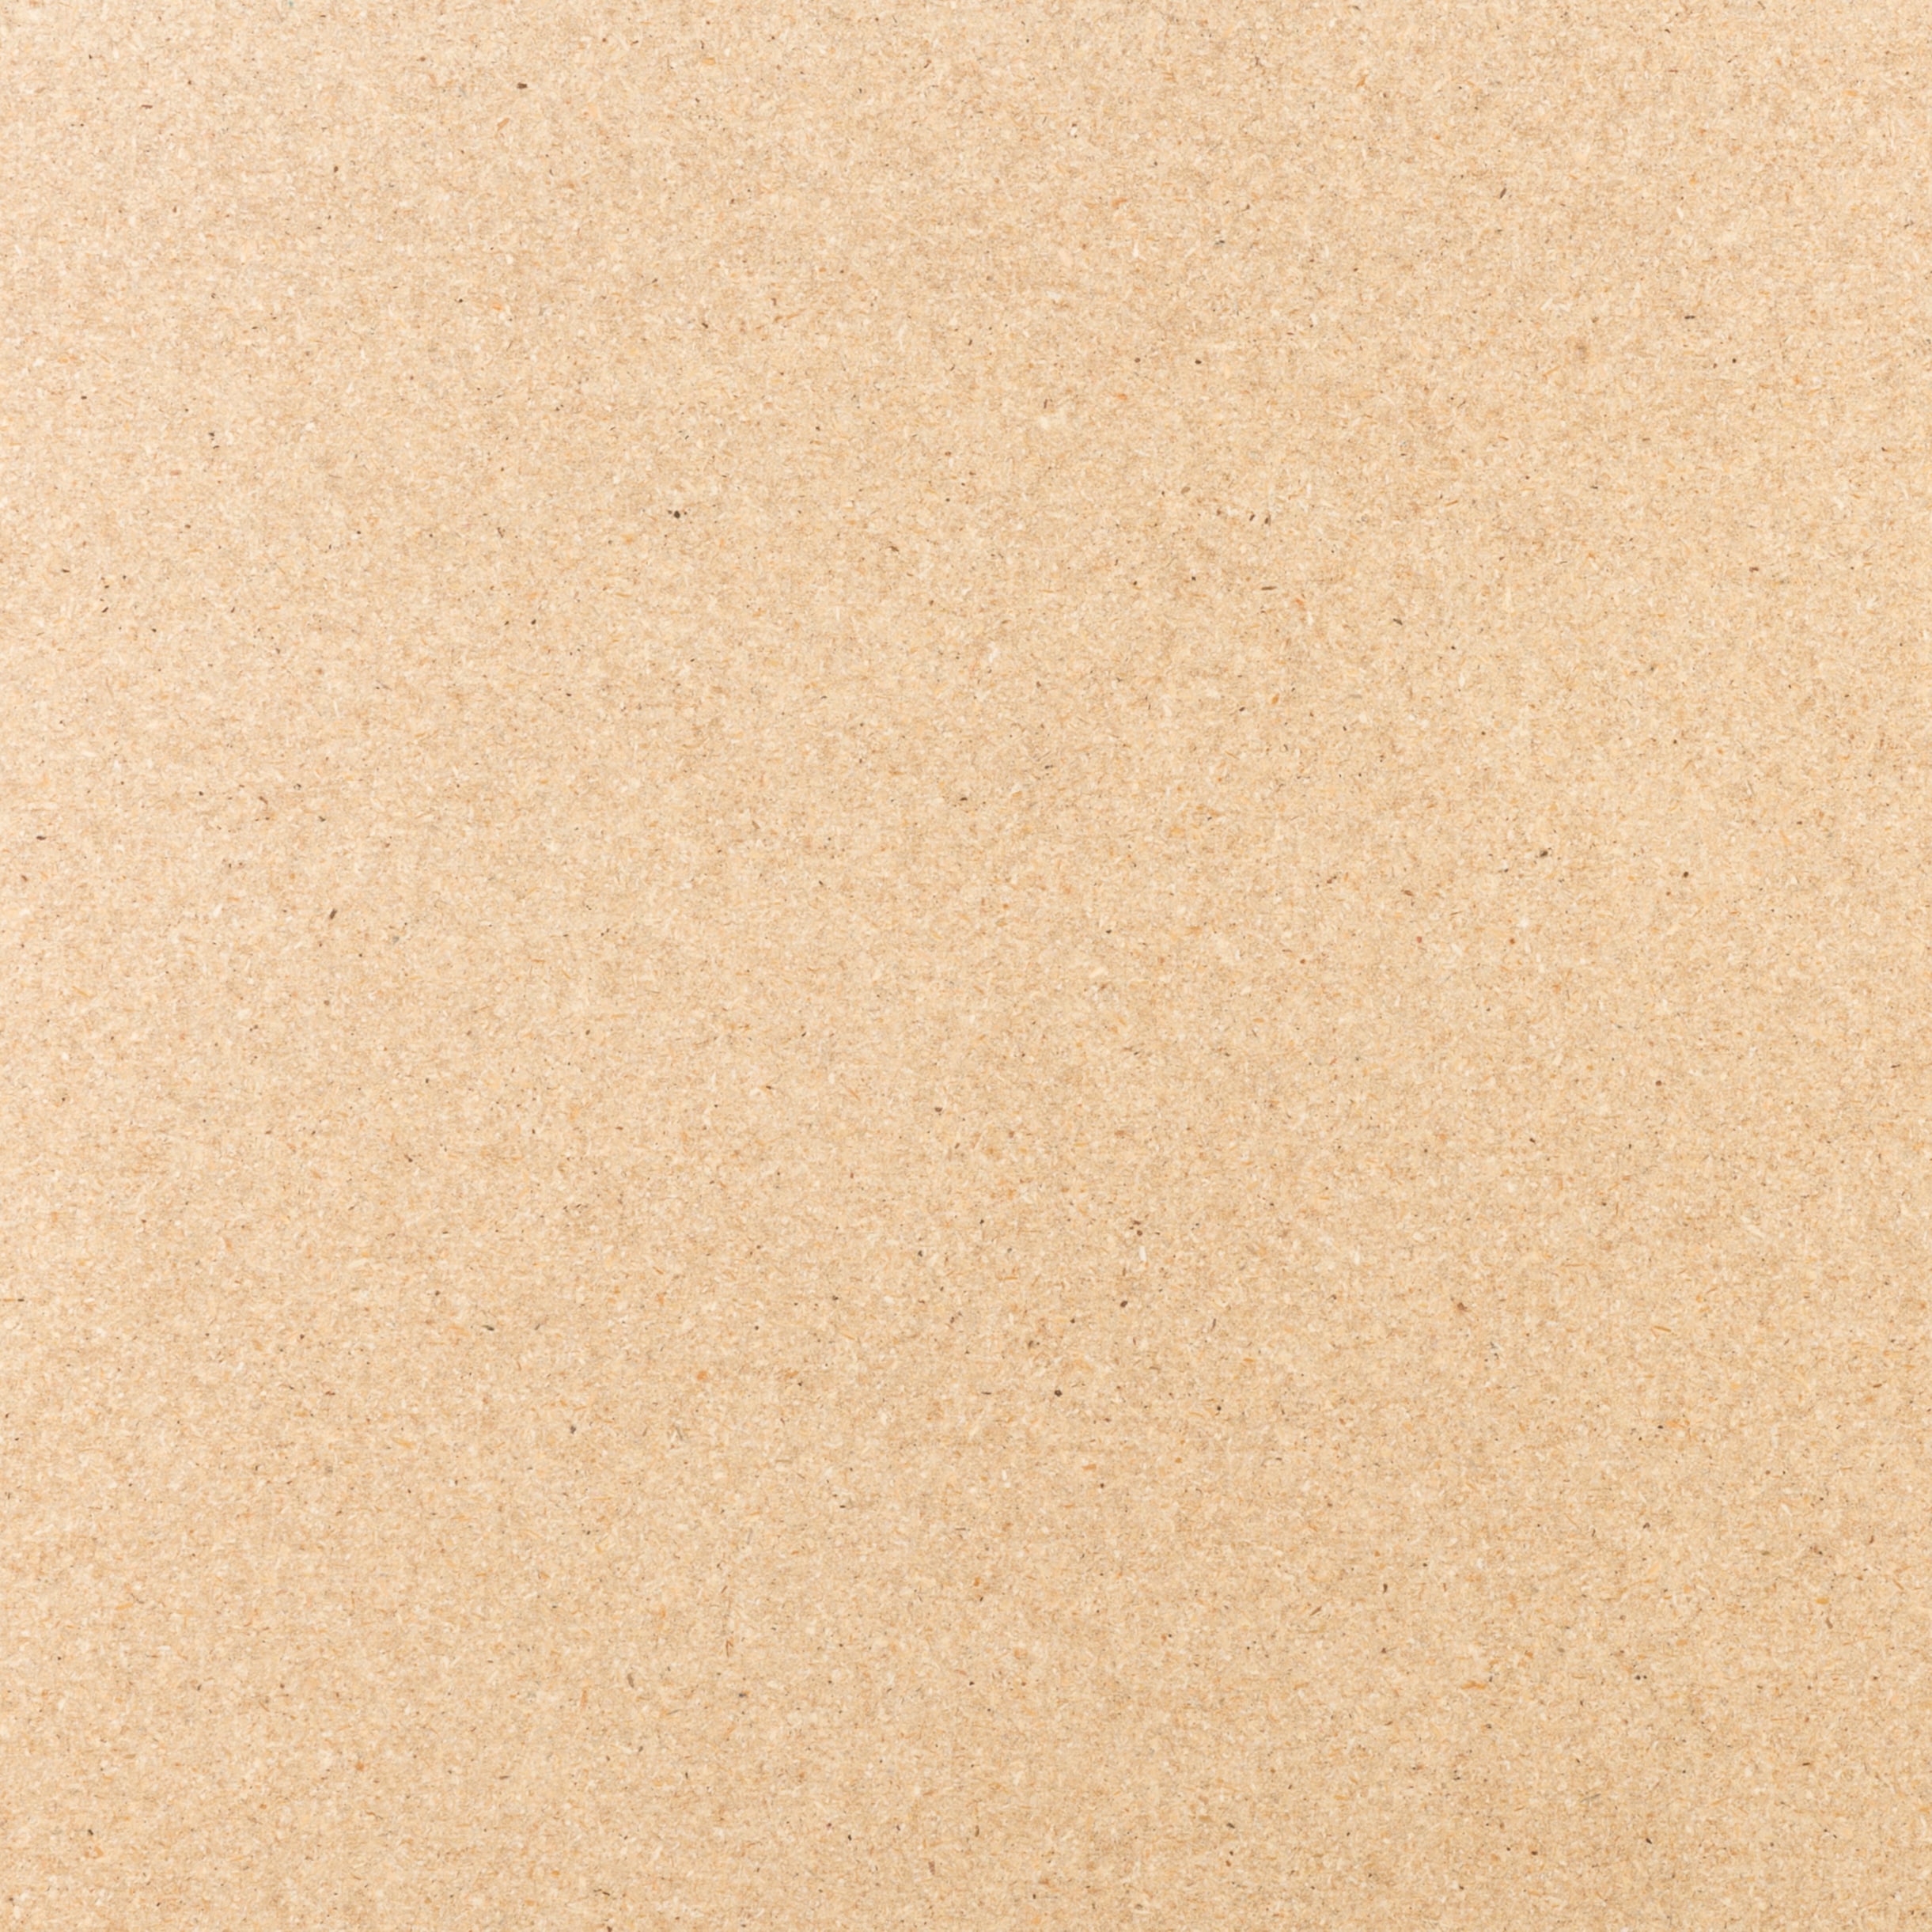 3/8 in. x 4 ft. x 8 ft. Particle Board Panel 604461 - The Home Depot